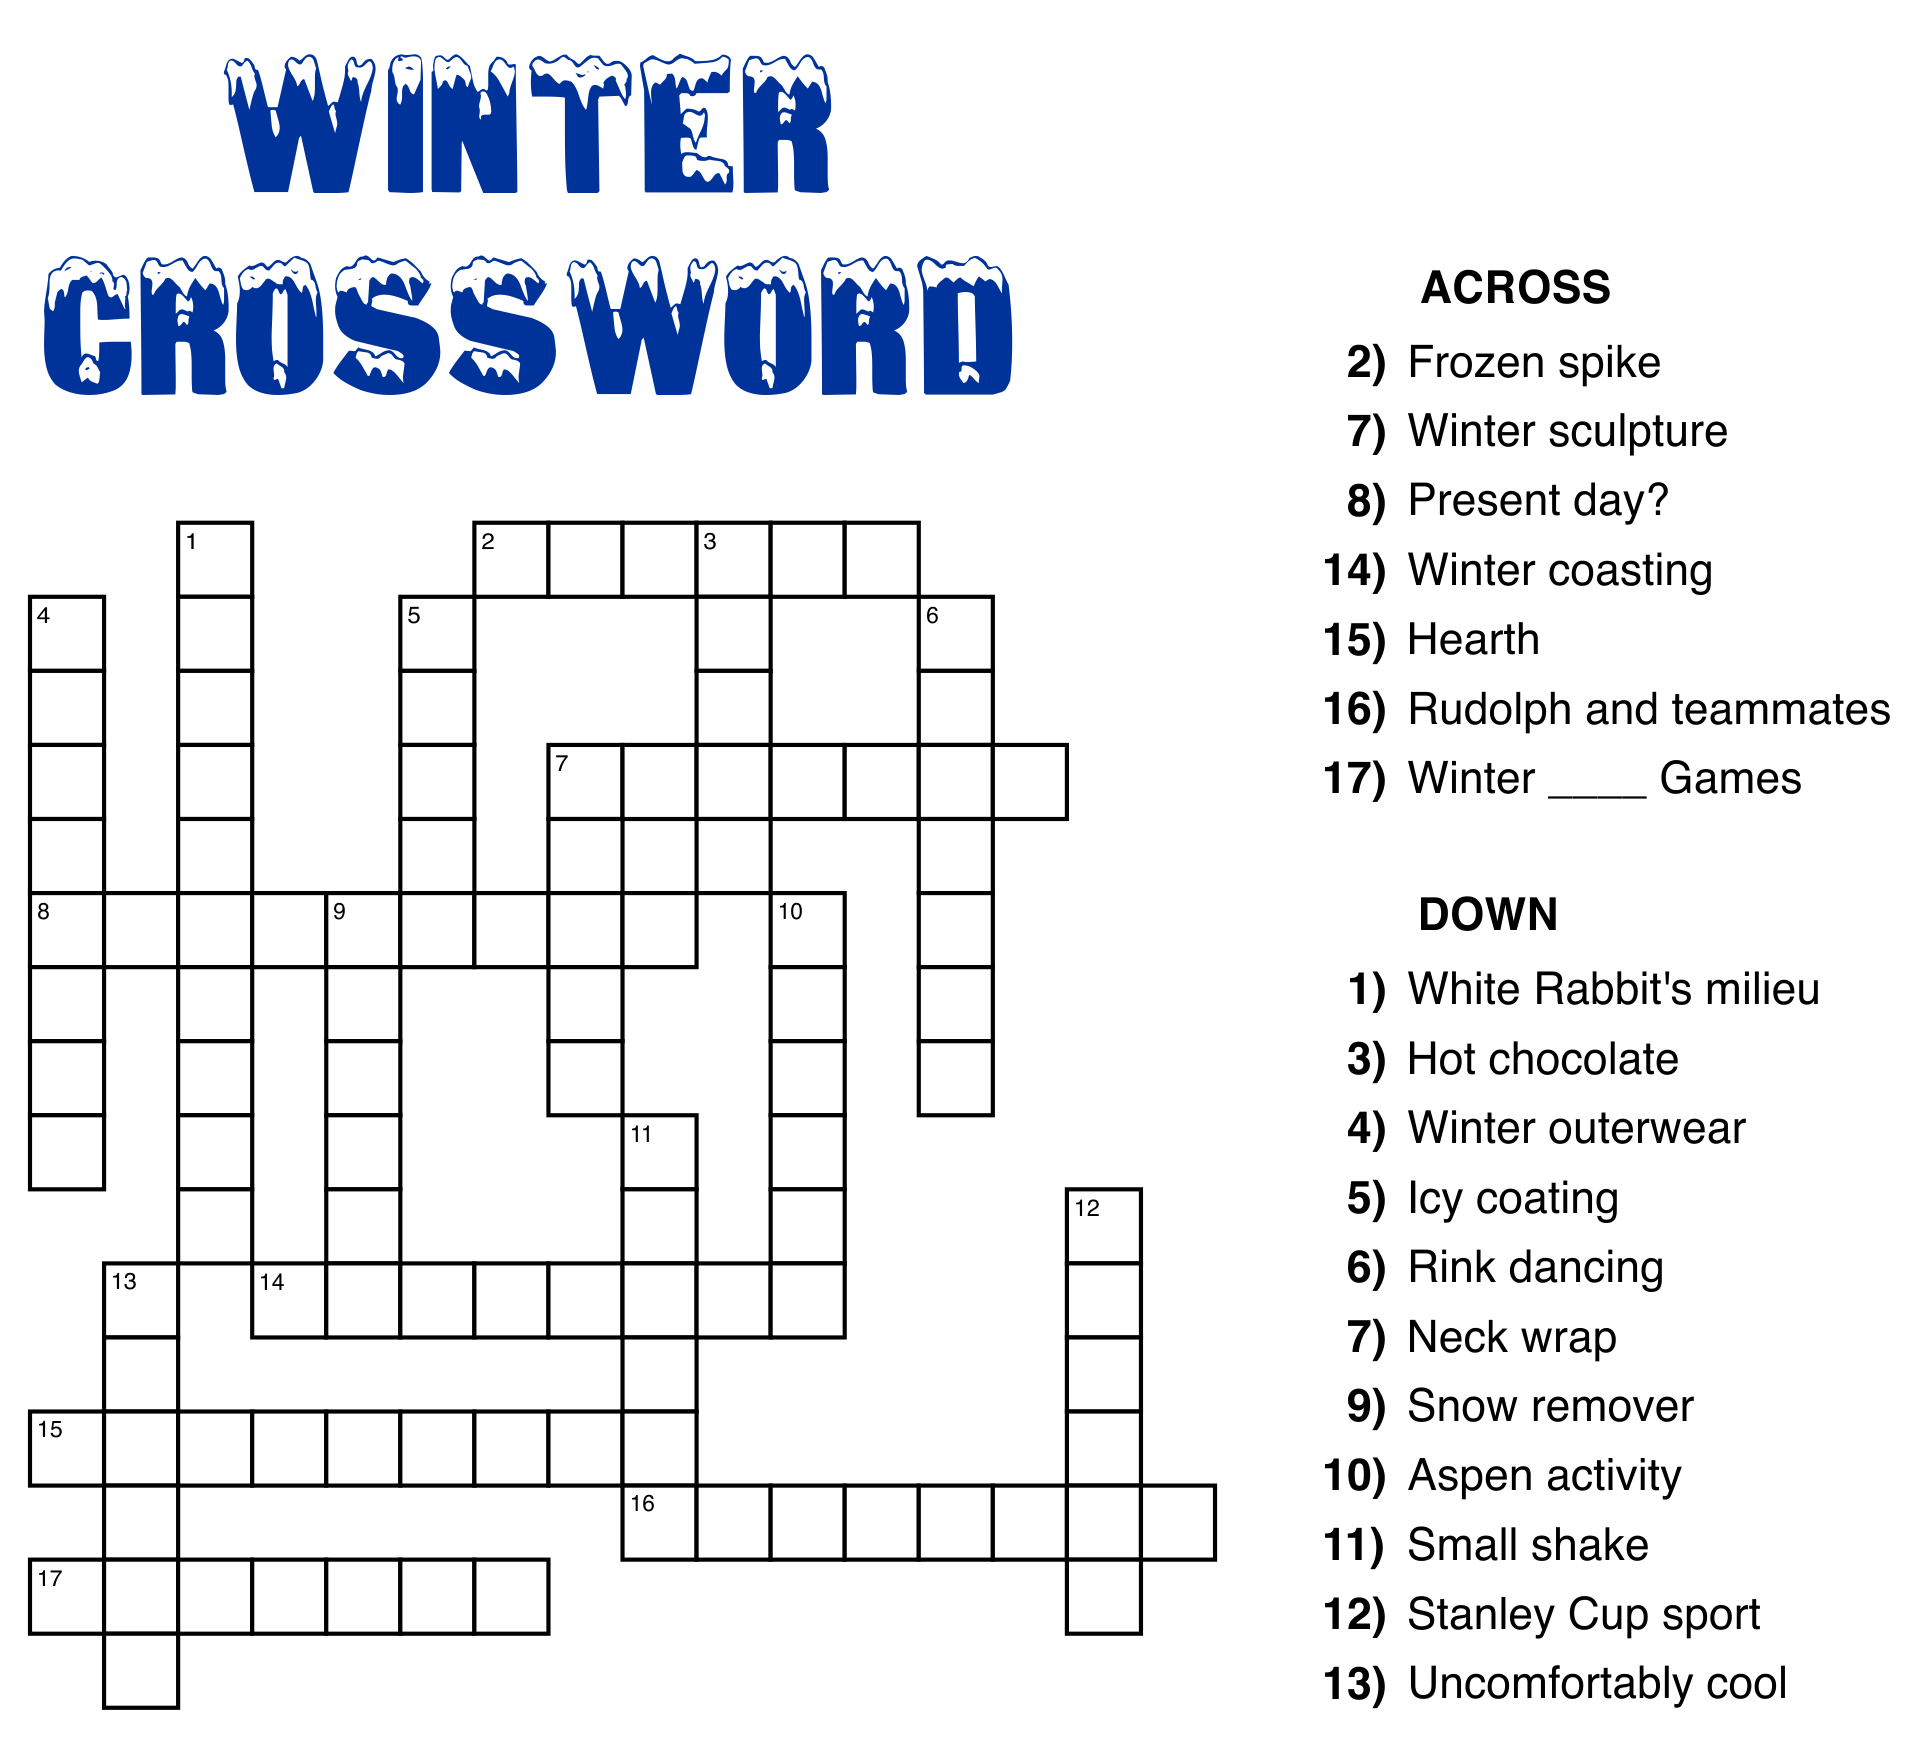 free printable sudoku and crossword puzzles